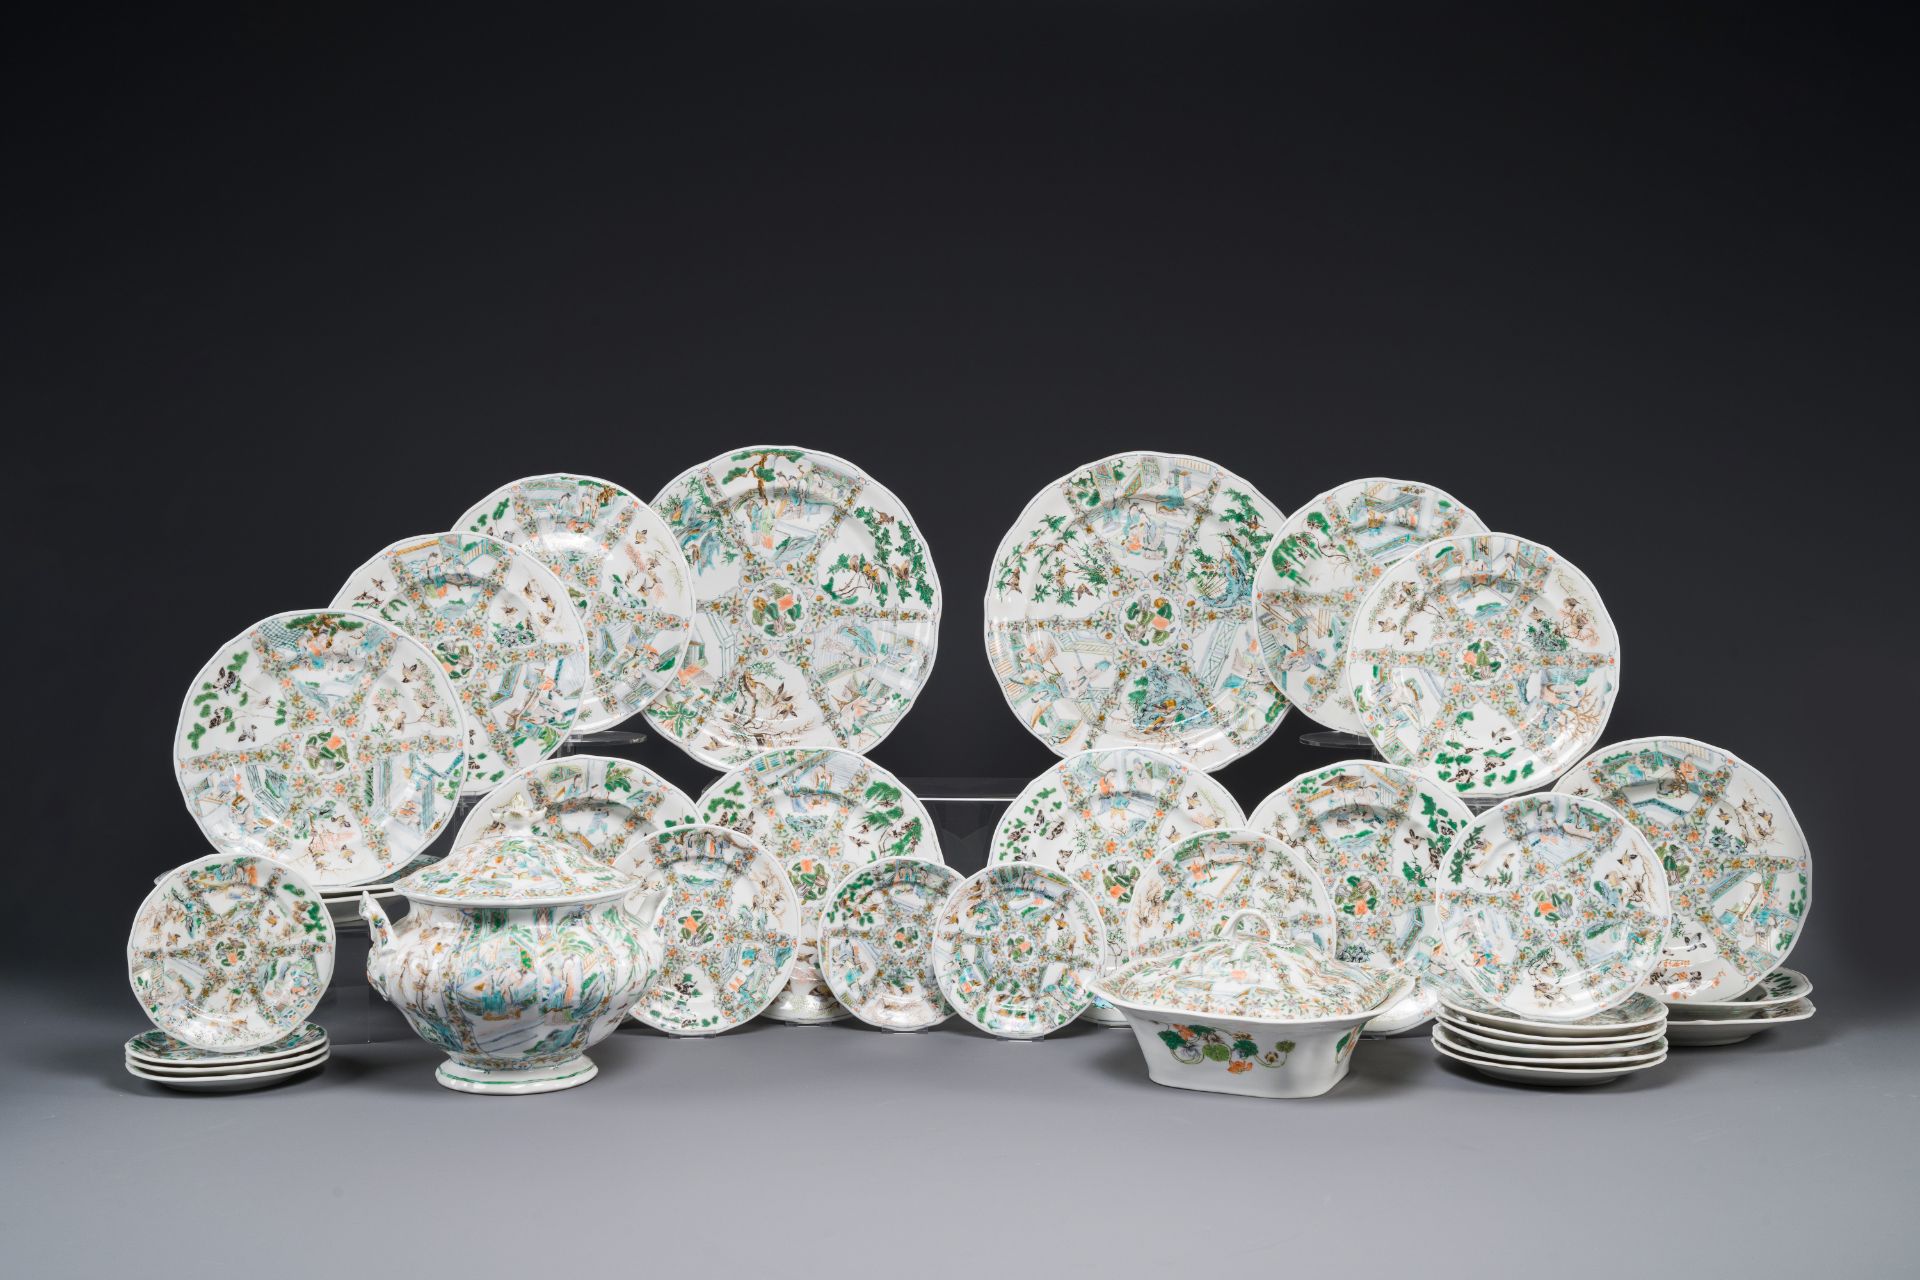 A rare 30-piece KPM porcelain service with Cantonese famille verte painting, China and Germany, 19th